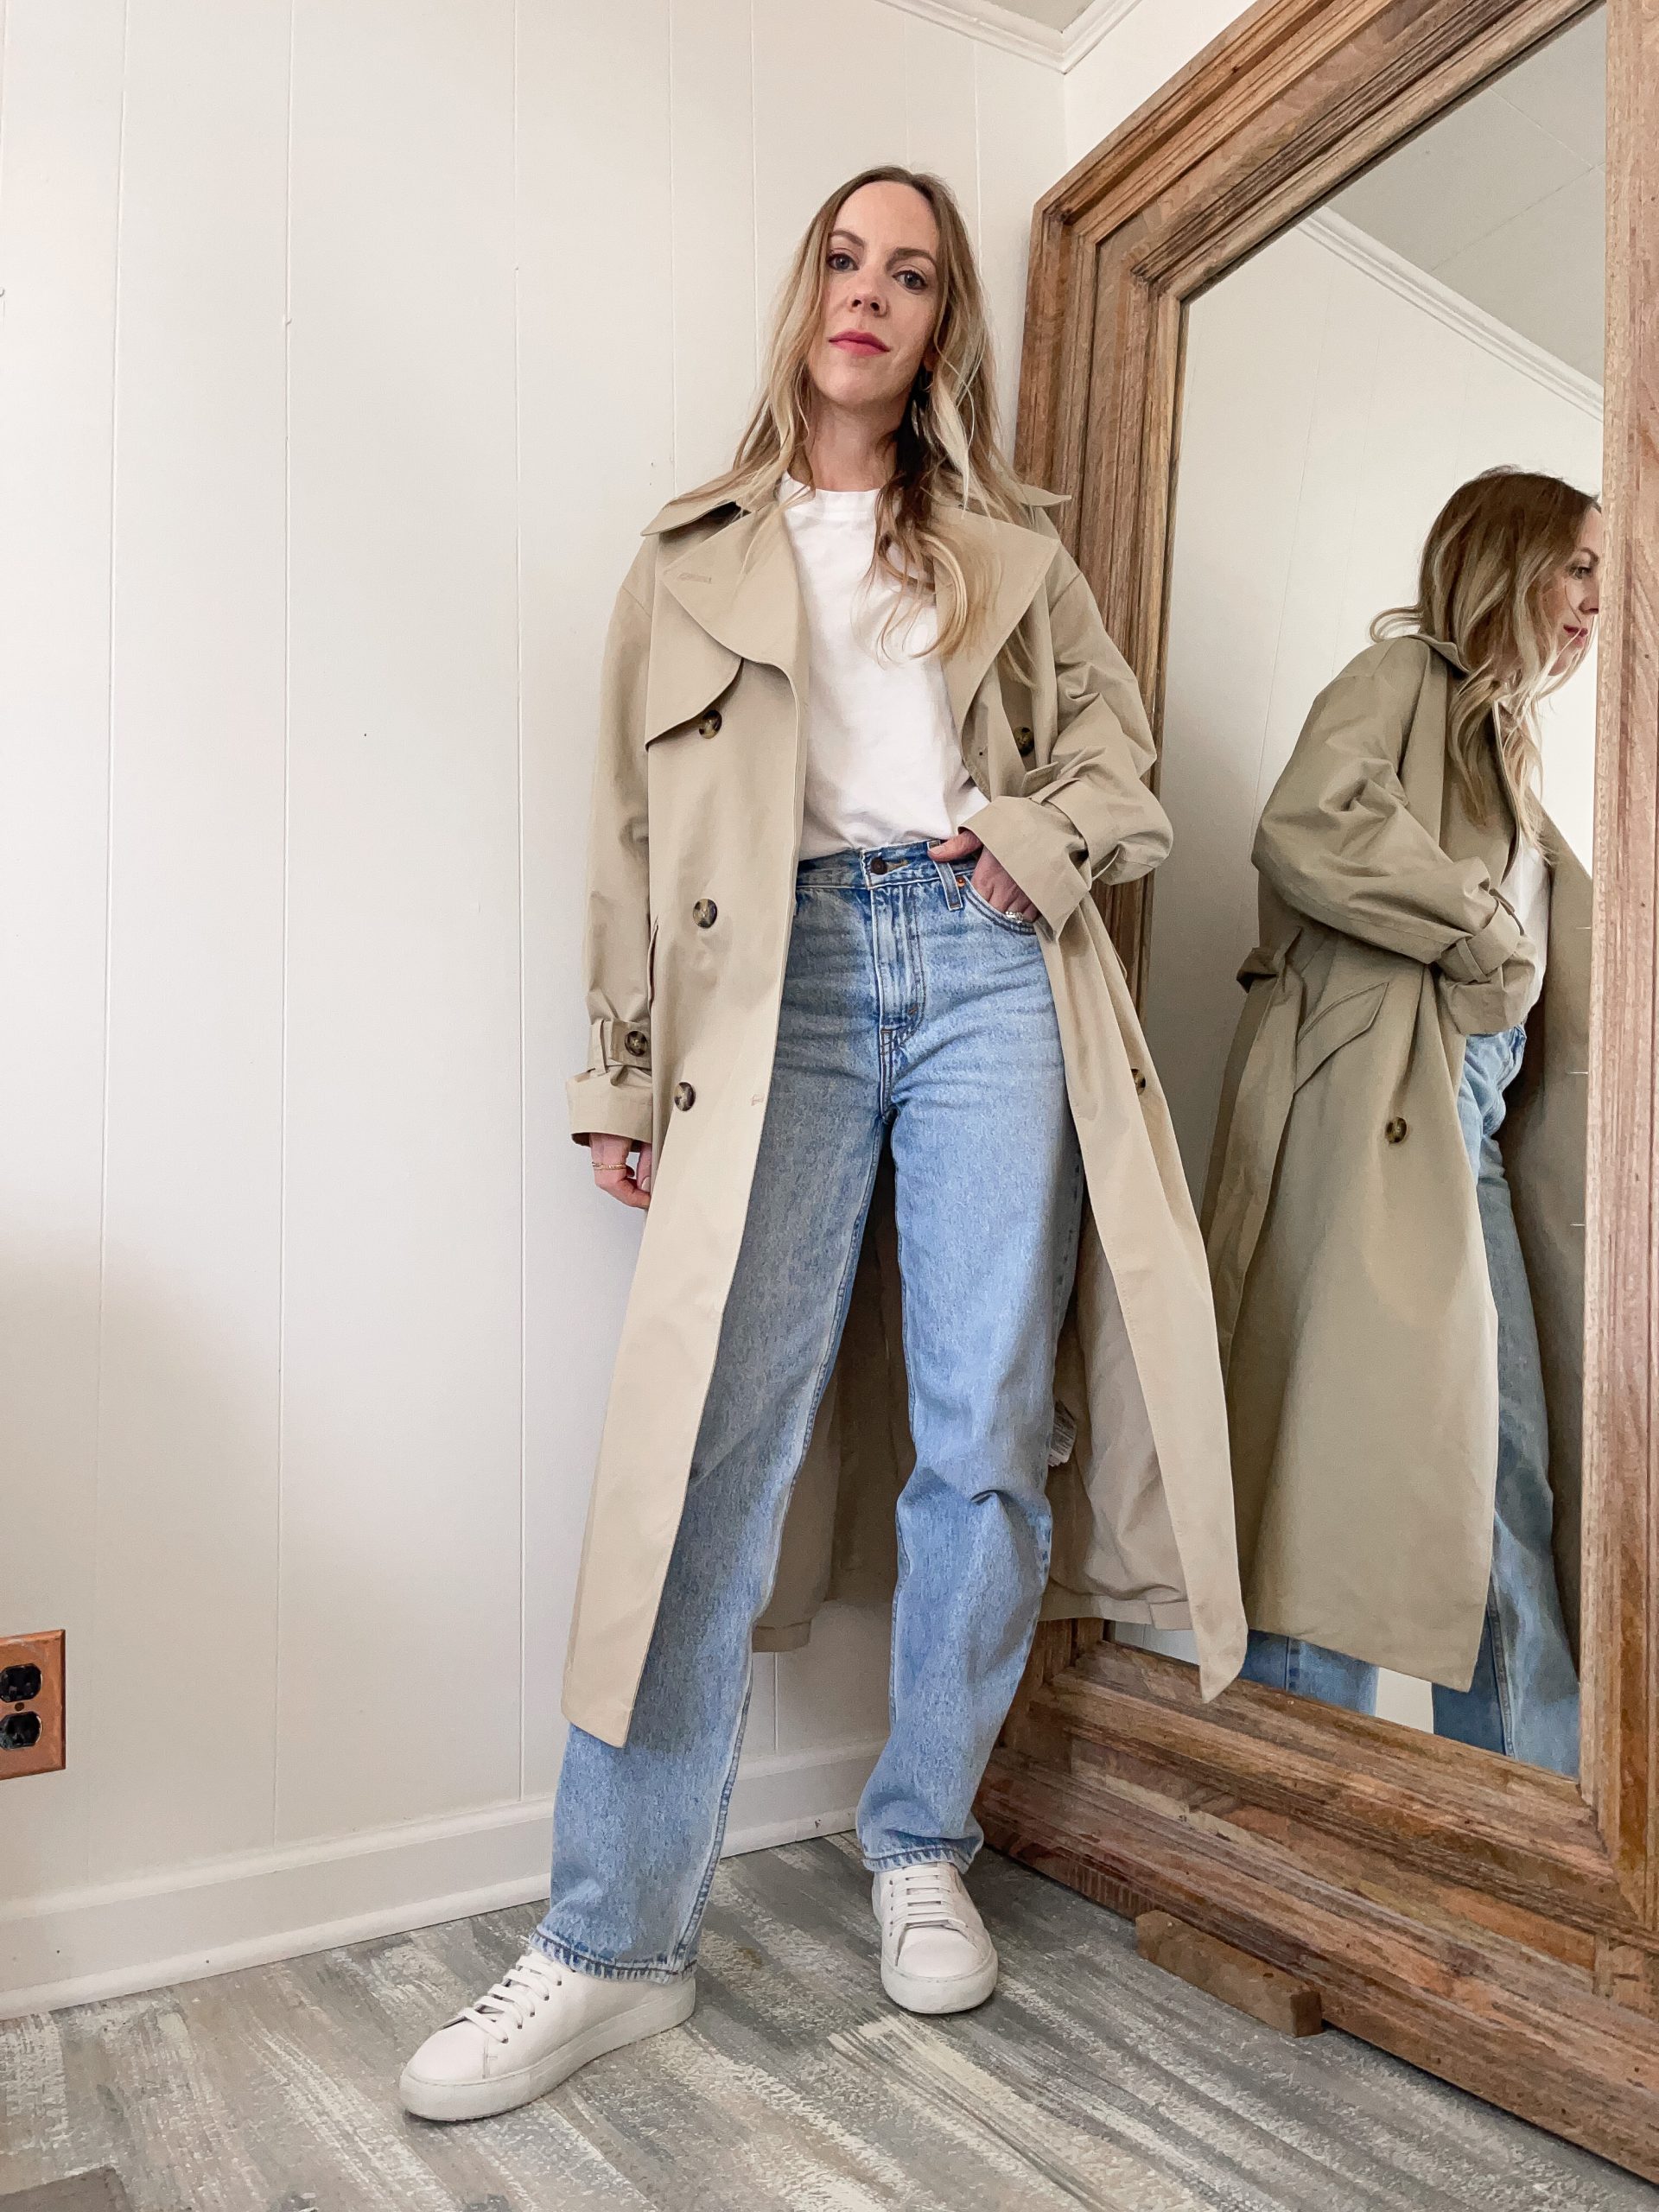 Spring Fashion Trends: Trench Coats and Outfit Ideas Around Spring